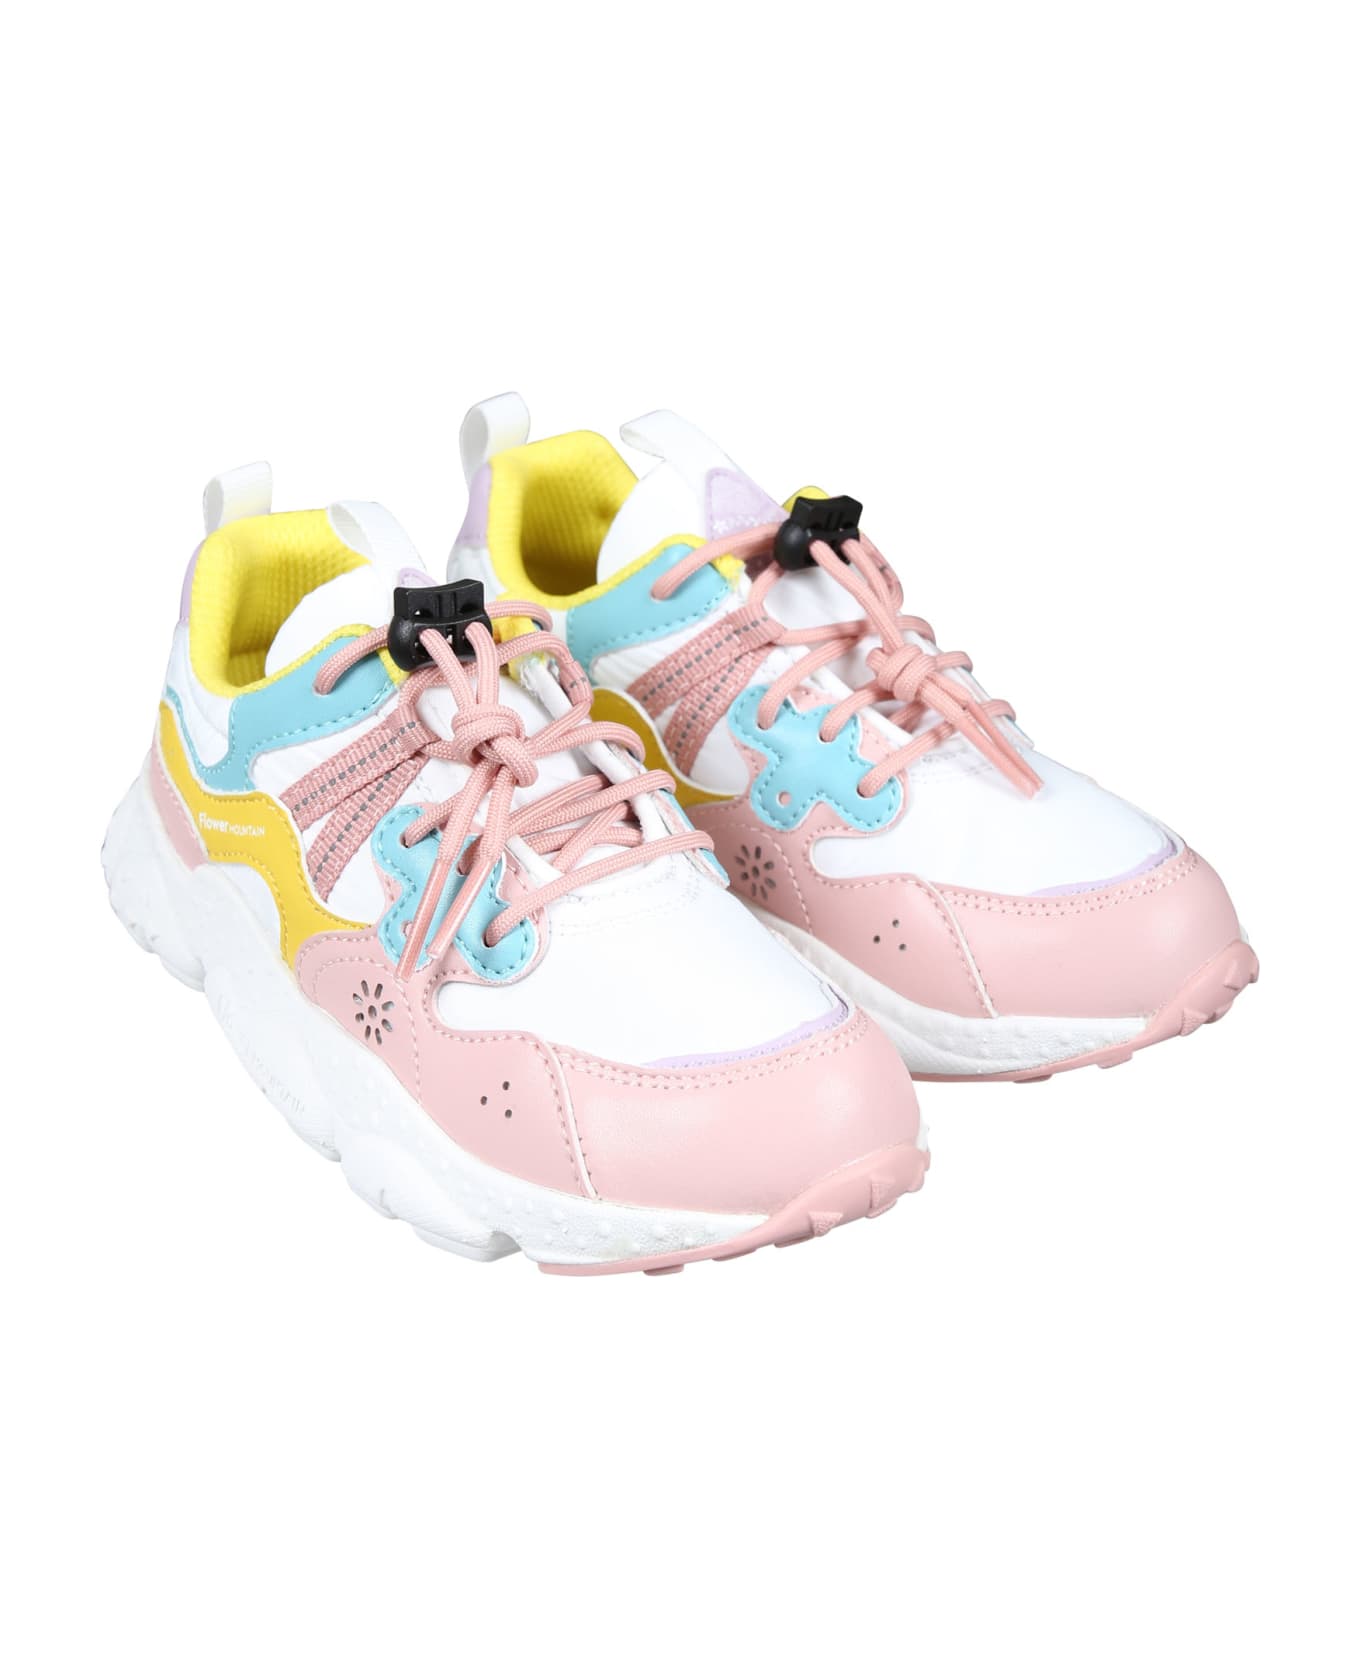 Flower Mountain Pink Yamano Sneakers For Girl With Logo - Pink シューズ